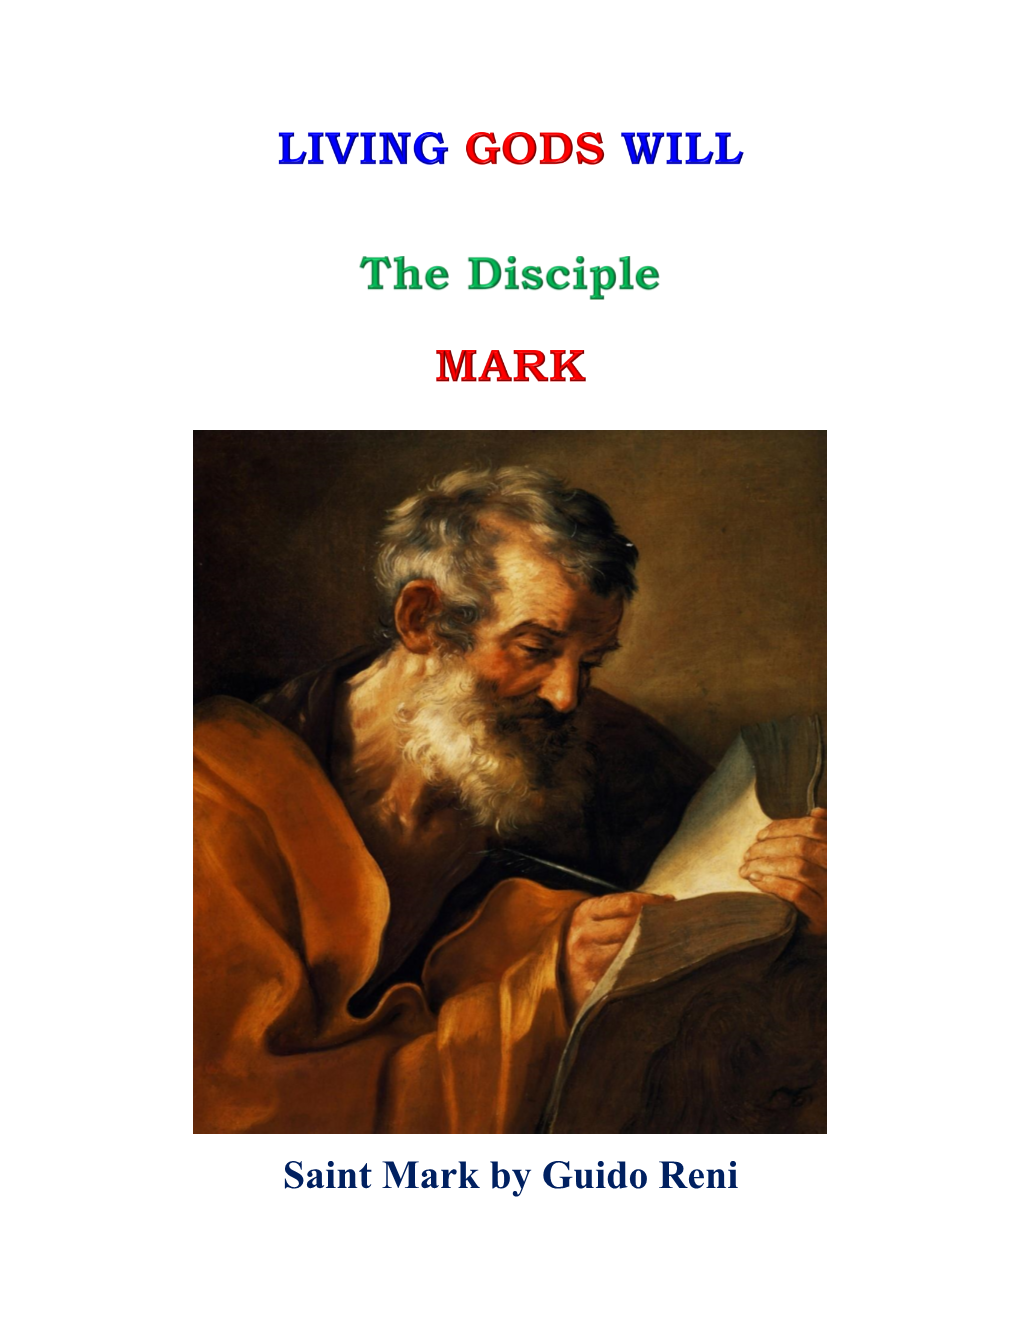 Saint Mark by Guido Reni the Disciple MARK Page 1